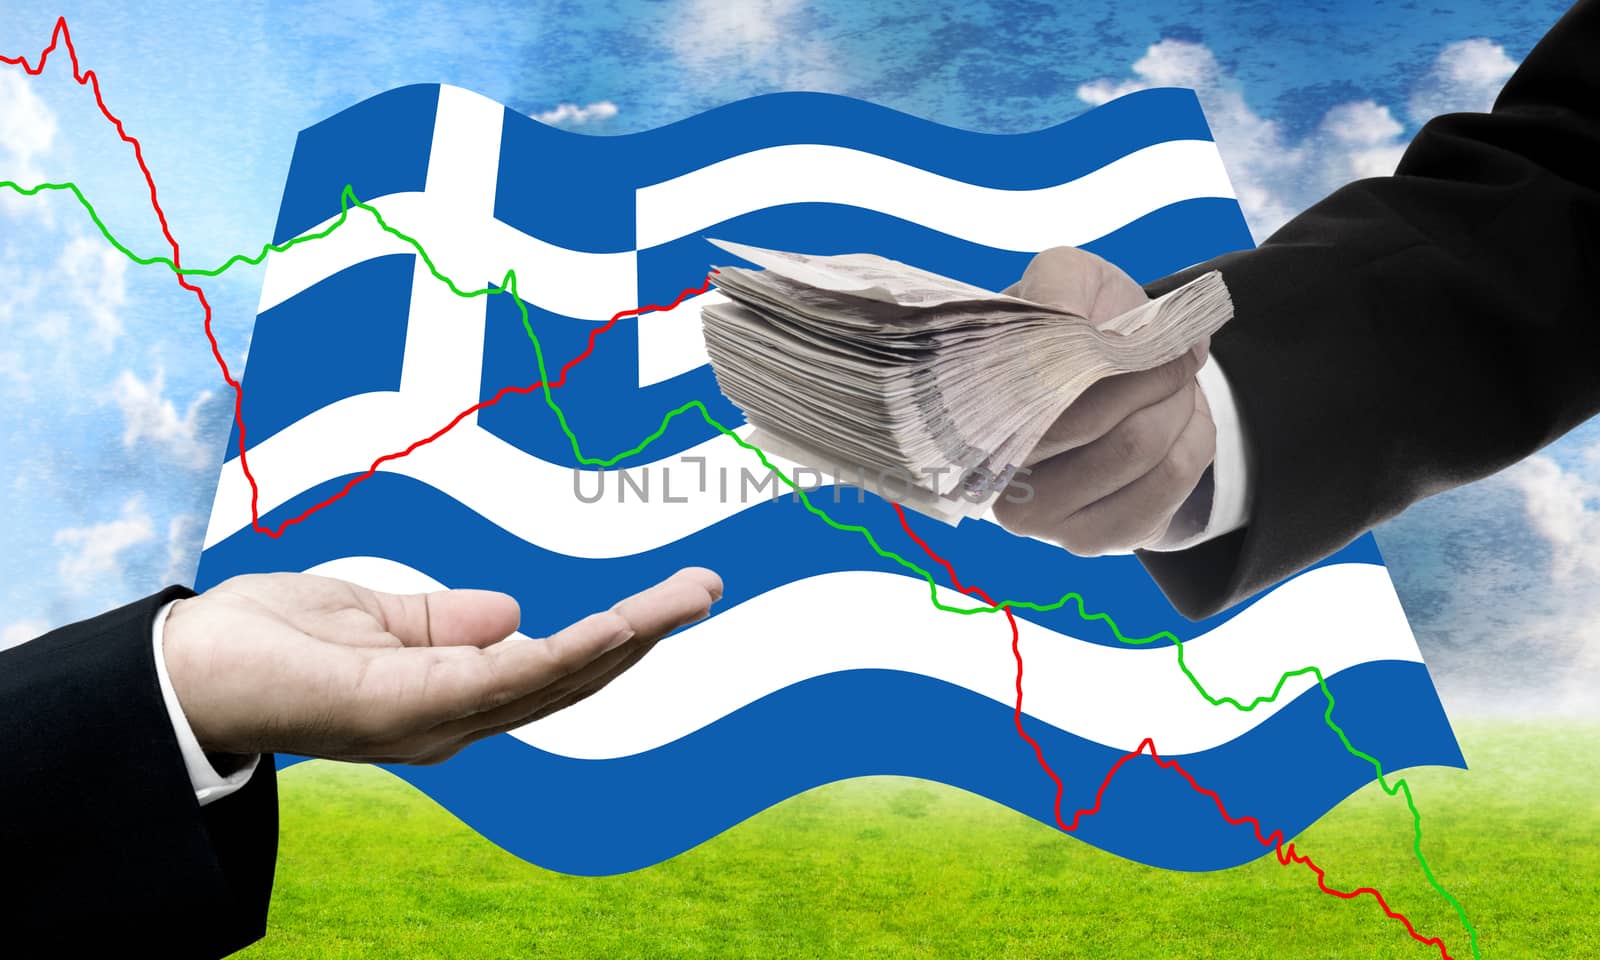 Creditors offer more loan, Greece’s Debt Crisis concept by pixbox77